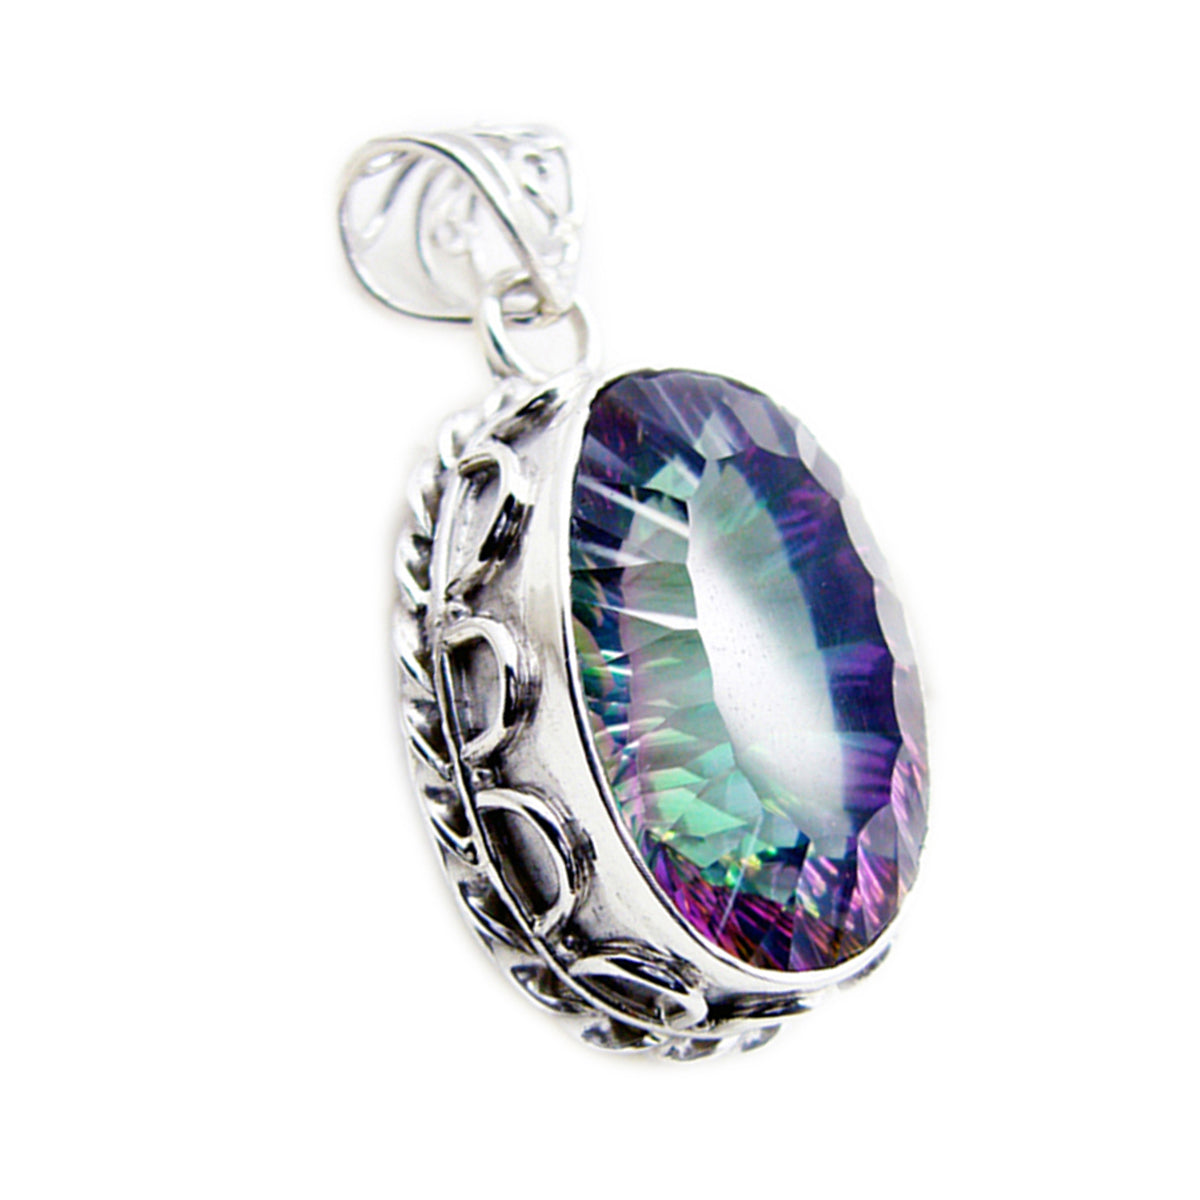 Riyo Exquisite Gemstone Oval Faceted Multi Color Mystic Quartz 1178 Sterling Silver Pendant Gift For Good Friday